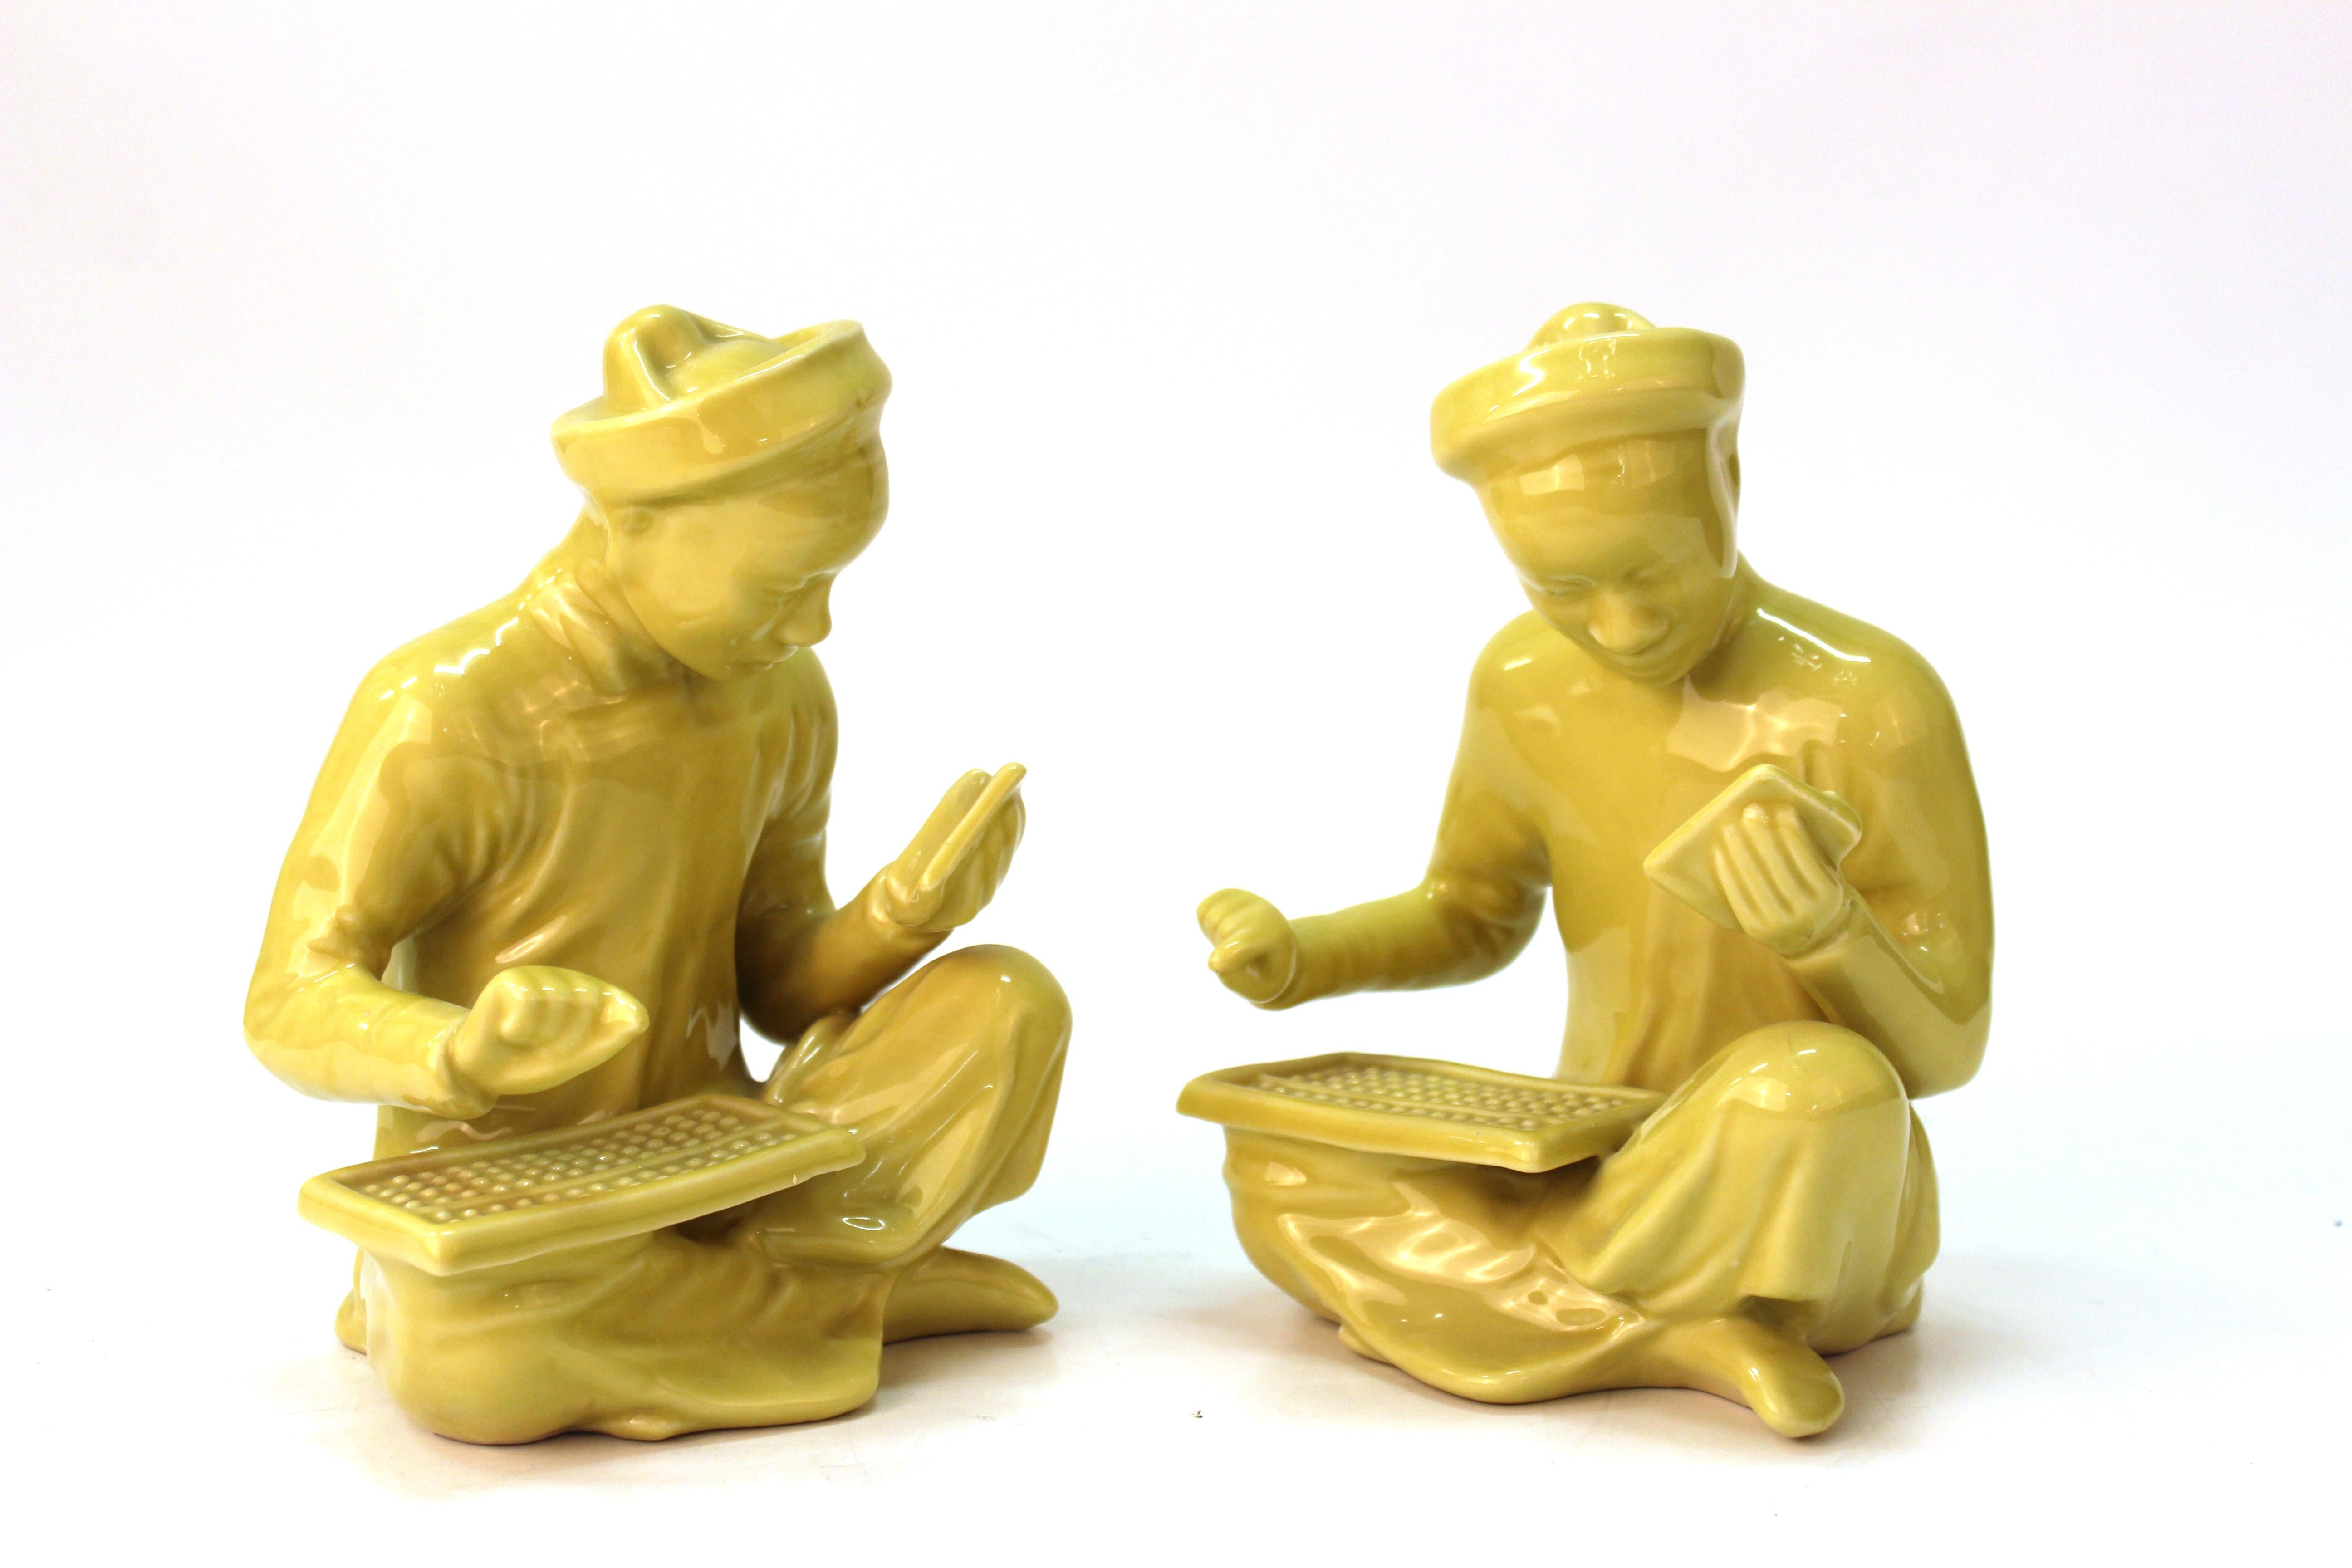 Chinese pair of seated mandarin statues in yellow glazed ceramic. The pair is in a seated position, at work with an abacus and scribe utensils. In good vintage condition with age-appropriate wear.